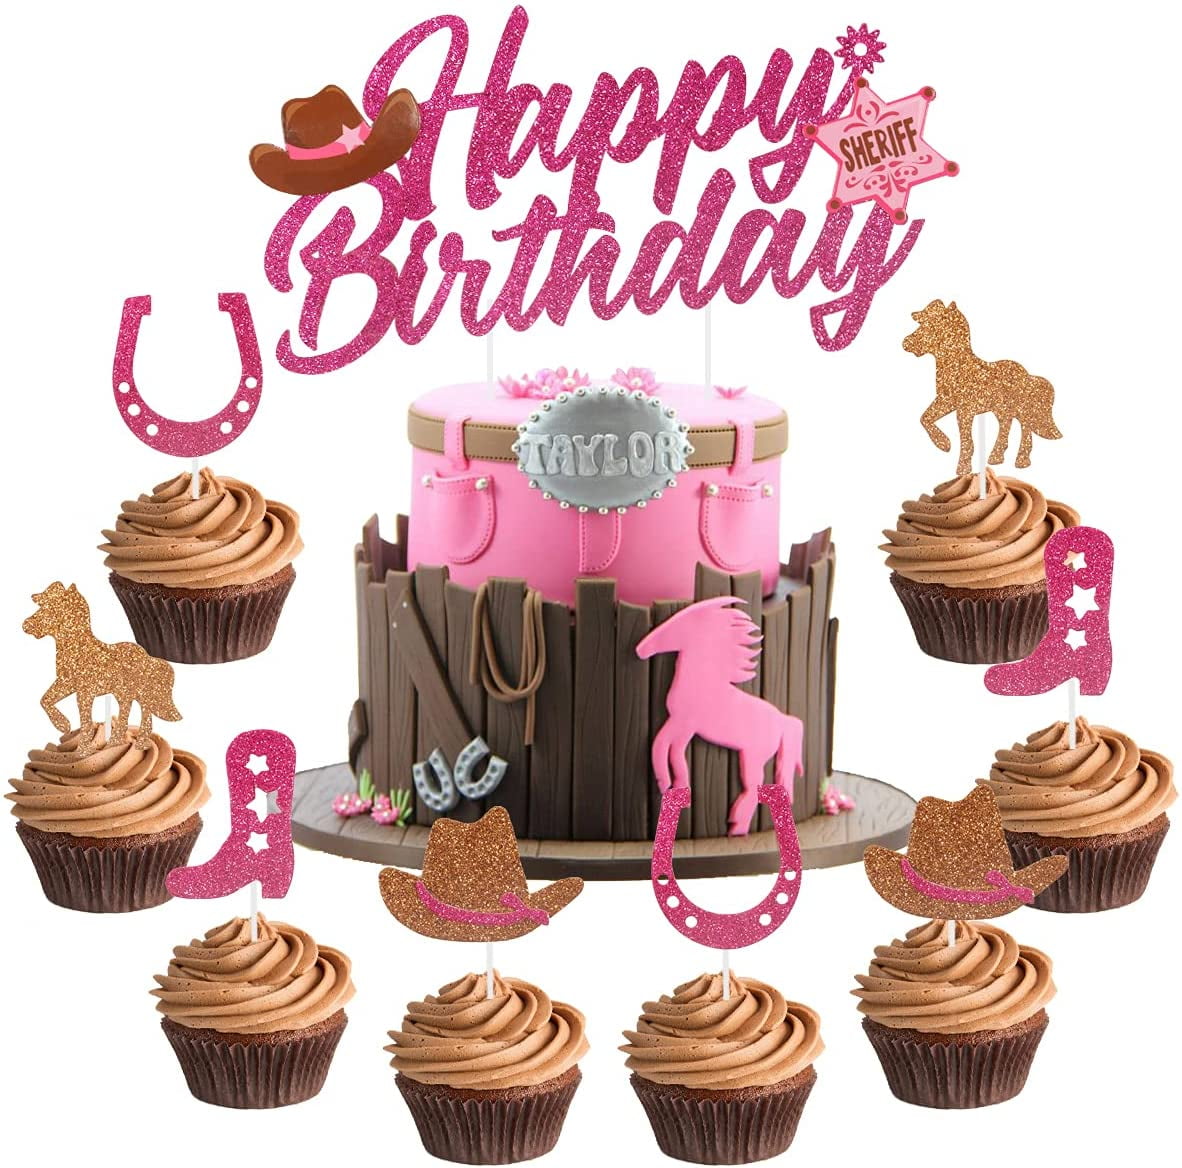 Western Theme Birthday or Baby Shower Decorations Supplies Cowboy Party Cupcake Toppers 25 PCS 